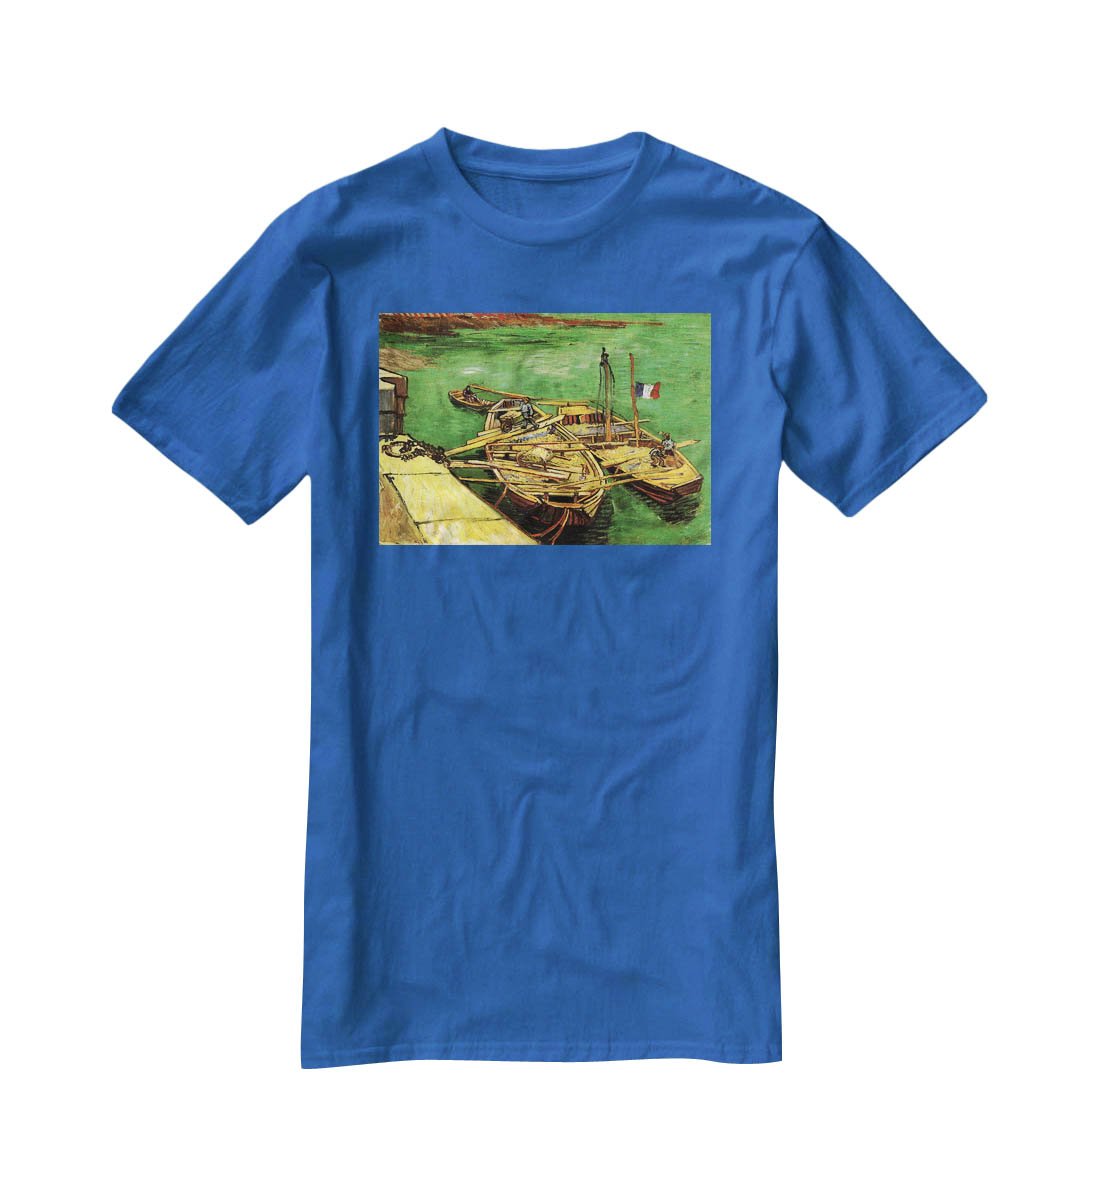 Quay with Men Unloading Sand Barges by Van Gogh T-Shirt - Canvas Art Rocks - 2